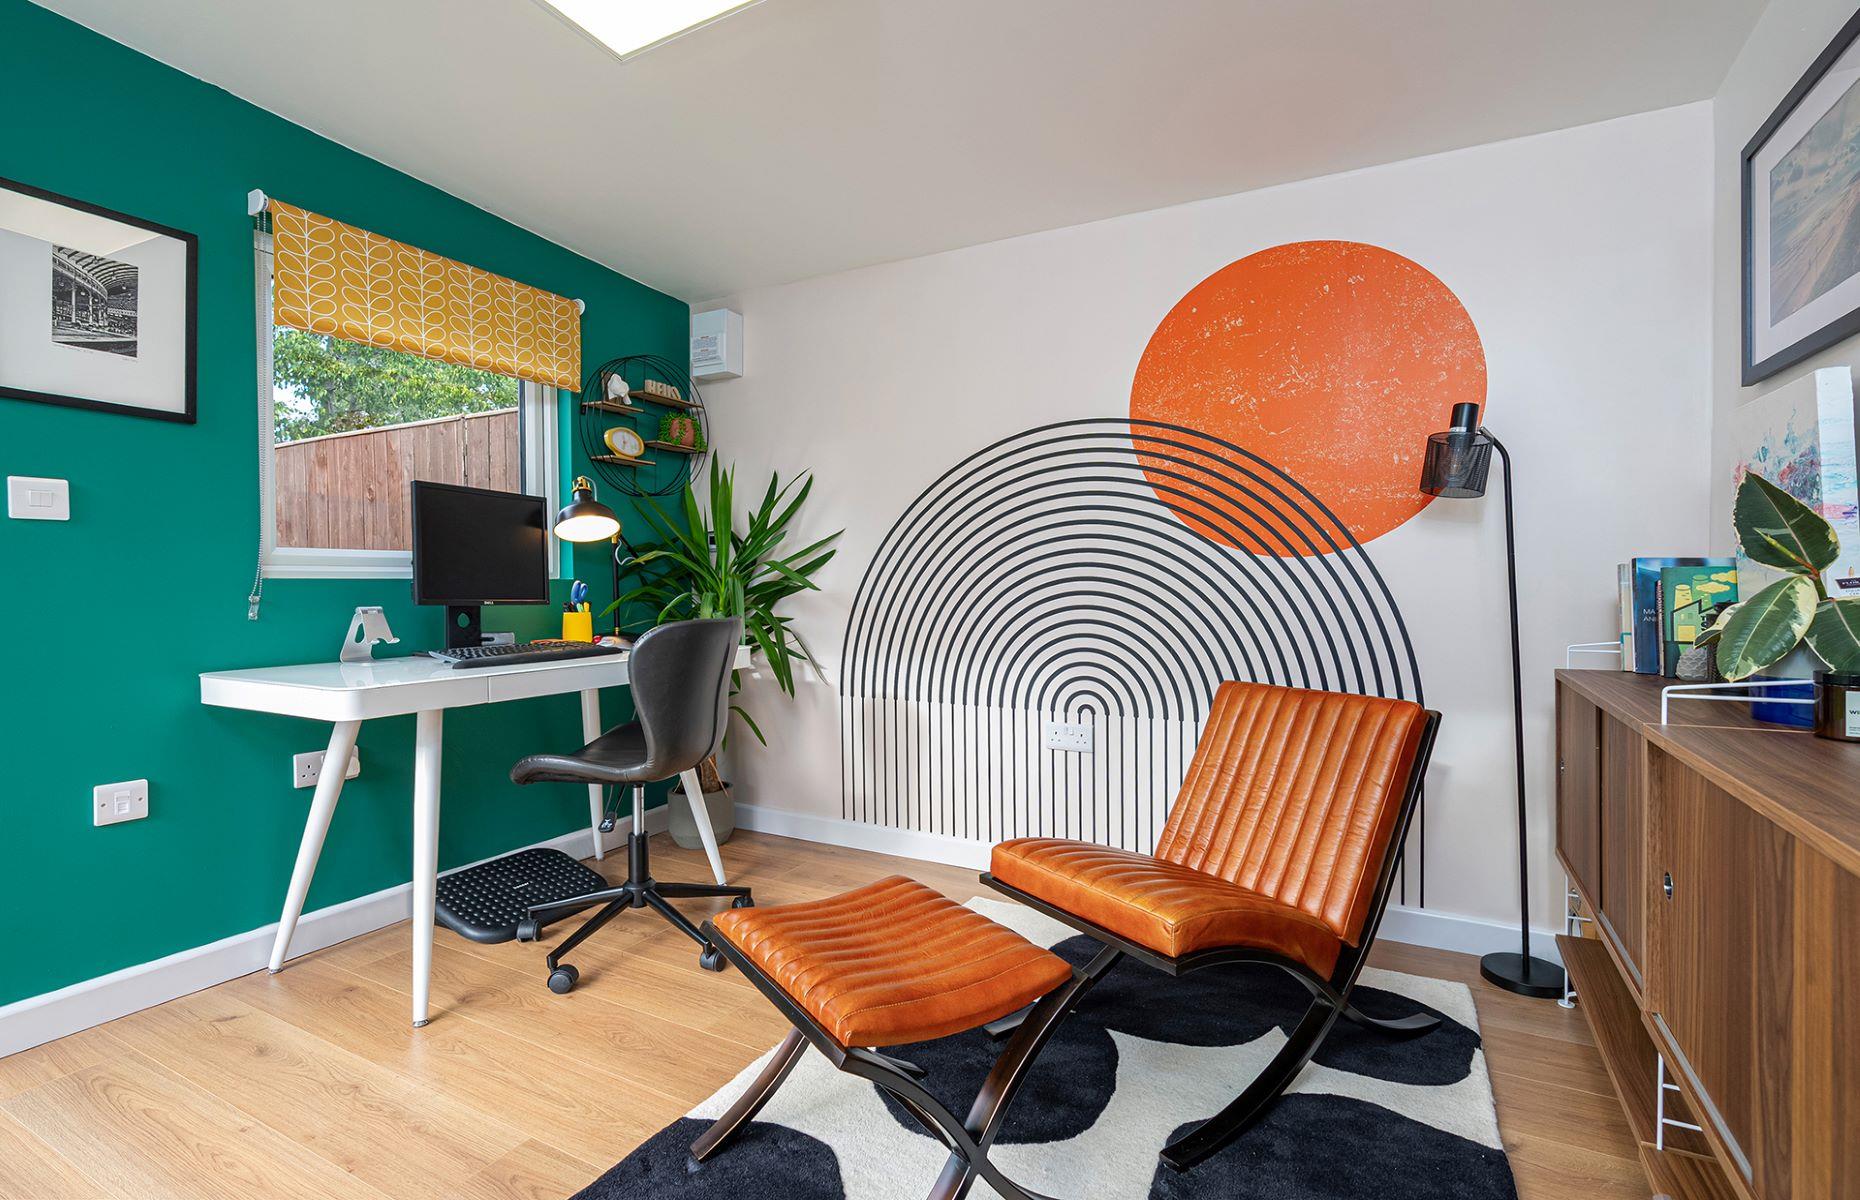 <p>It's safe to say the way we work has changed, with remote working becoming the norm. So, having a <a href="https://www.loveproperty.com/gallerylist/70389/70-hardworking-home-offices-that-dont-scrimp-on-style">home office</a> has become essential for many. If you're considering one, it's a good idea to upgrade your broadband, and you may want to include smart tech and extra storage. Create an area that is as comfortable to be in as possible. Loft spaces will be good for light and a spot overlooking the garden will provide a scenic view. You could even consider converting a shed to create a quiet space away from the main hubbub of the house.</p>